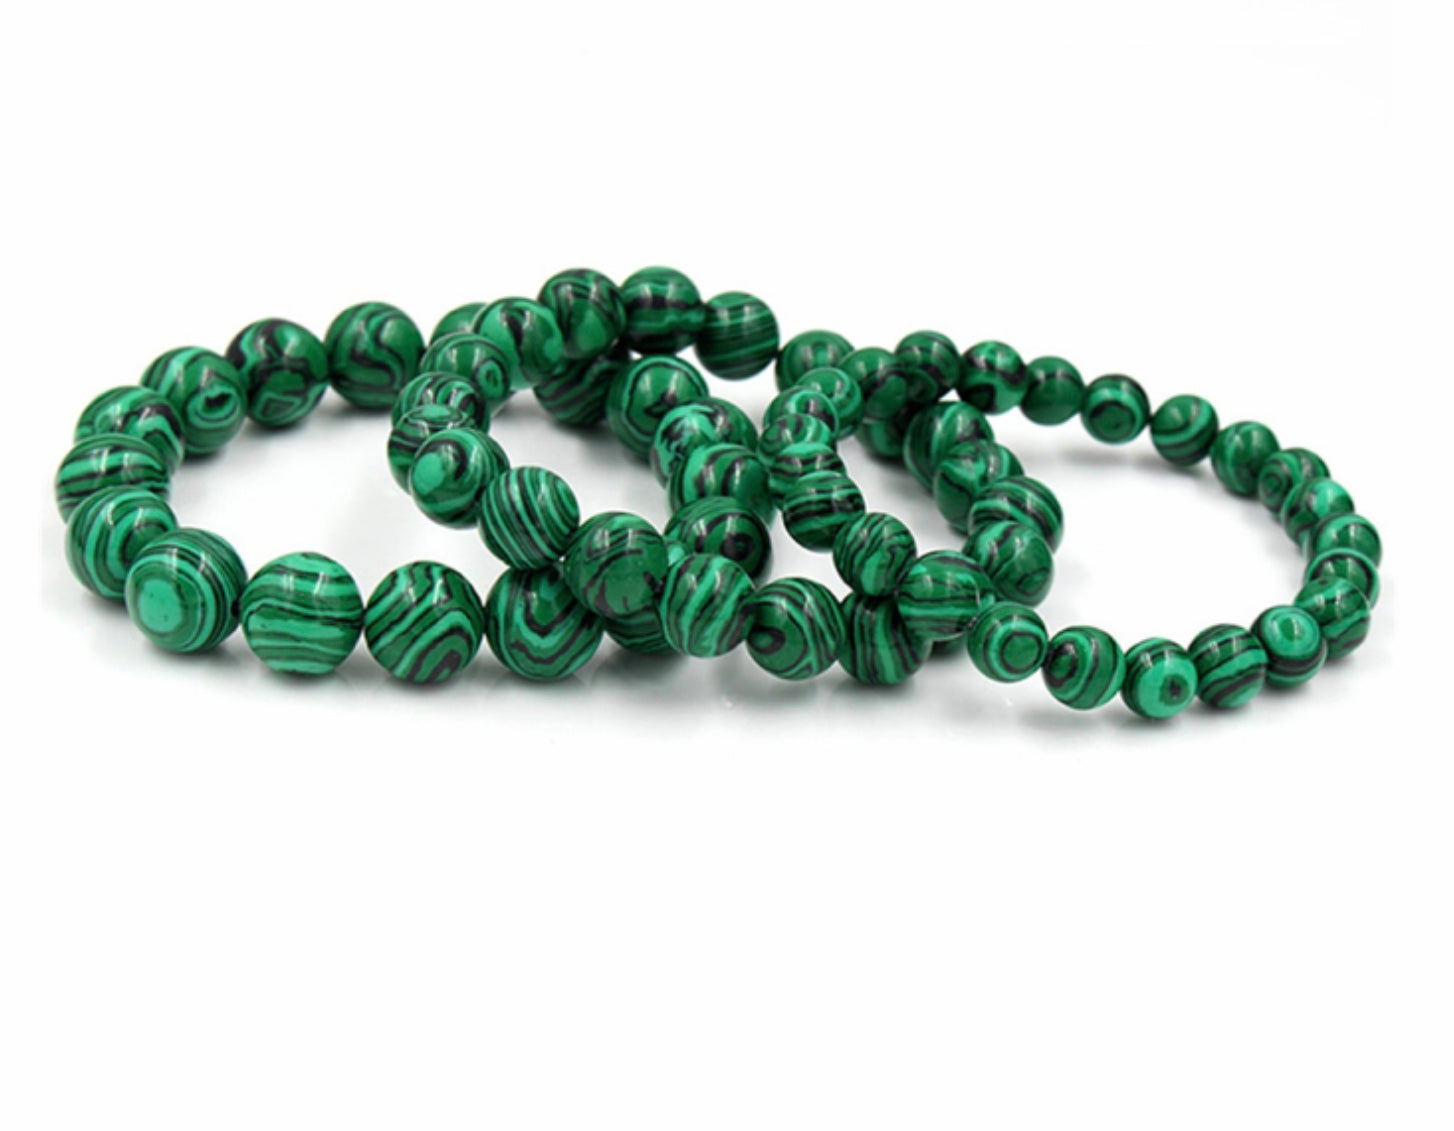 Malachite Meaning, Uses, and Benefits - Metaphysical Properties